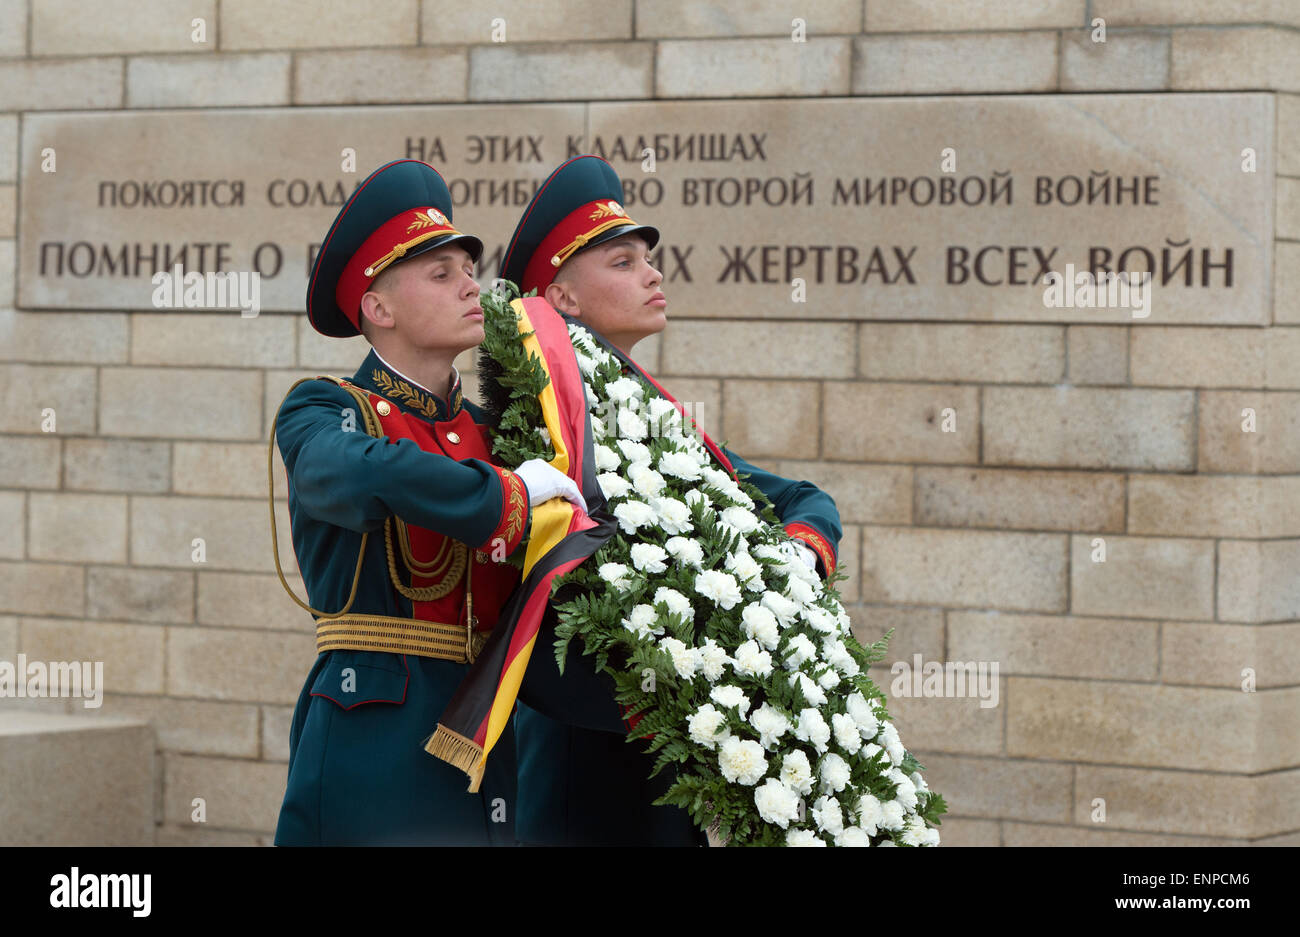 Volgograd, Russia. 7th May, 2015. Soldiers carry a wreath with a German ribbon at the Rossoschka military cemetary near Volgograd, Russia, 7 May 2015. Photo: Soeren Stache/dpa/Alamy Live News Stock Photo